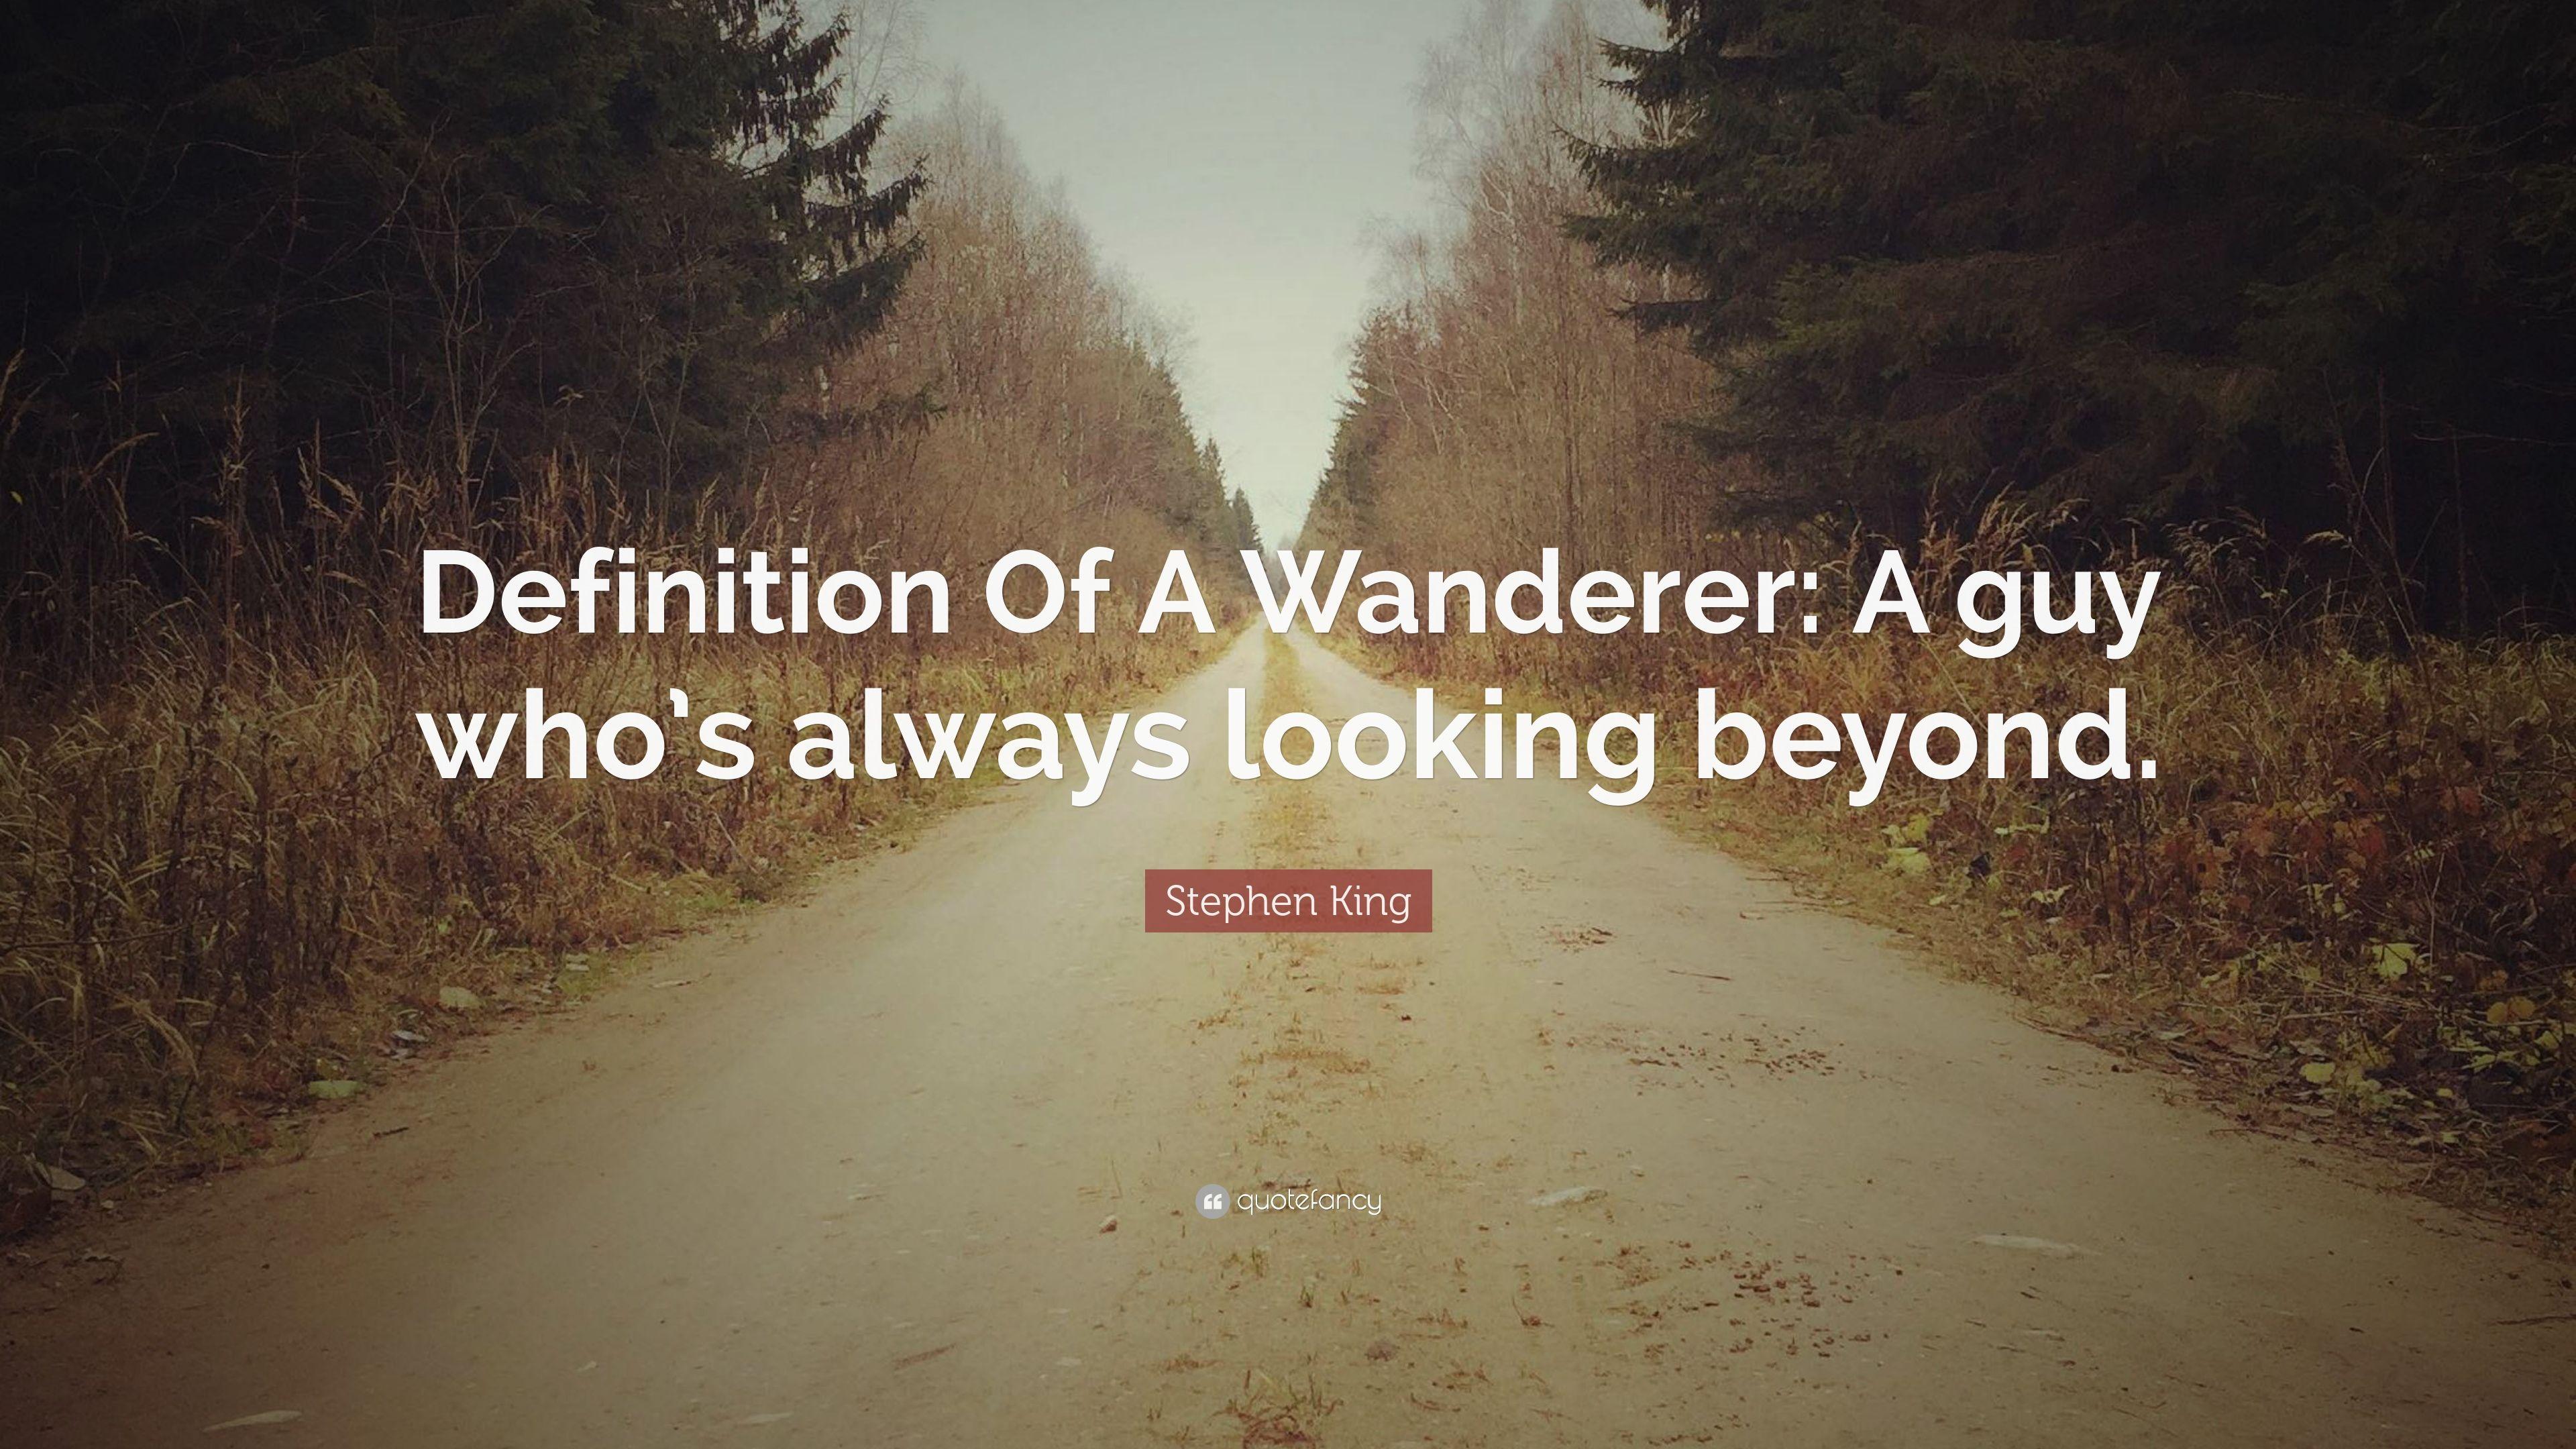 Stephen King Quote: “Definition Of A Wanderer: A guy who's always